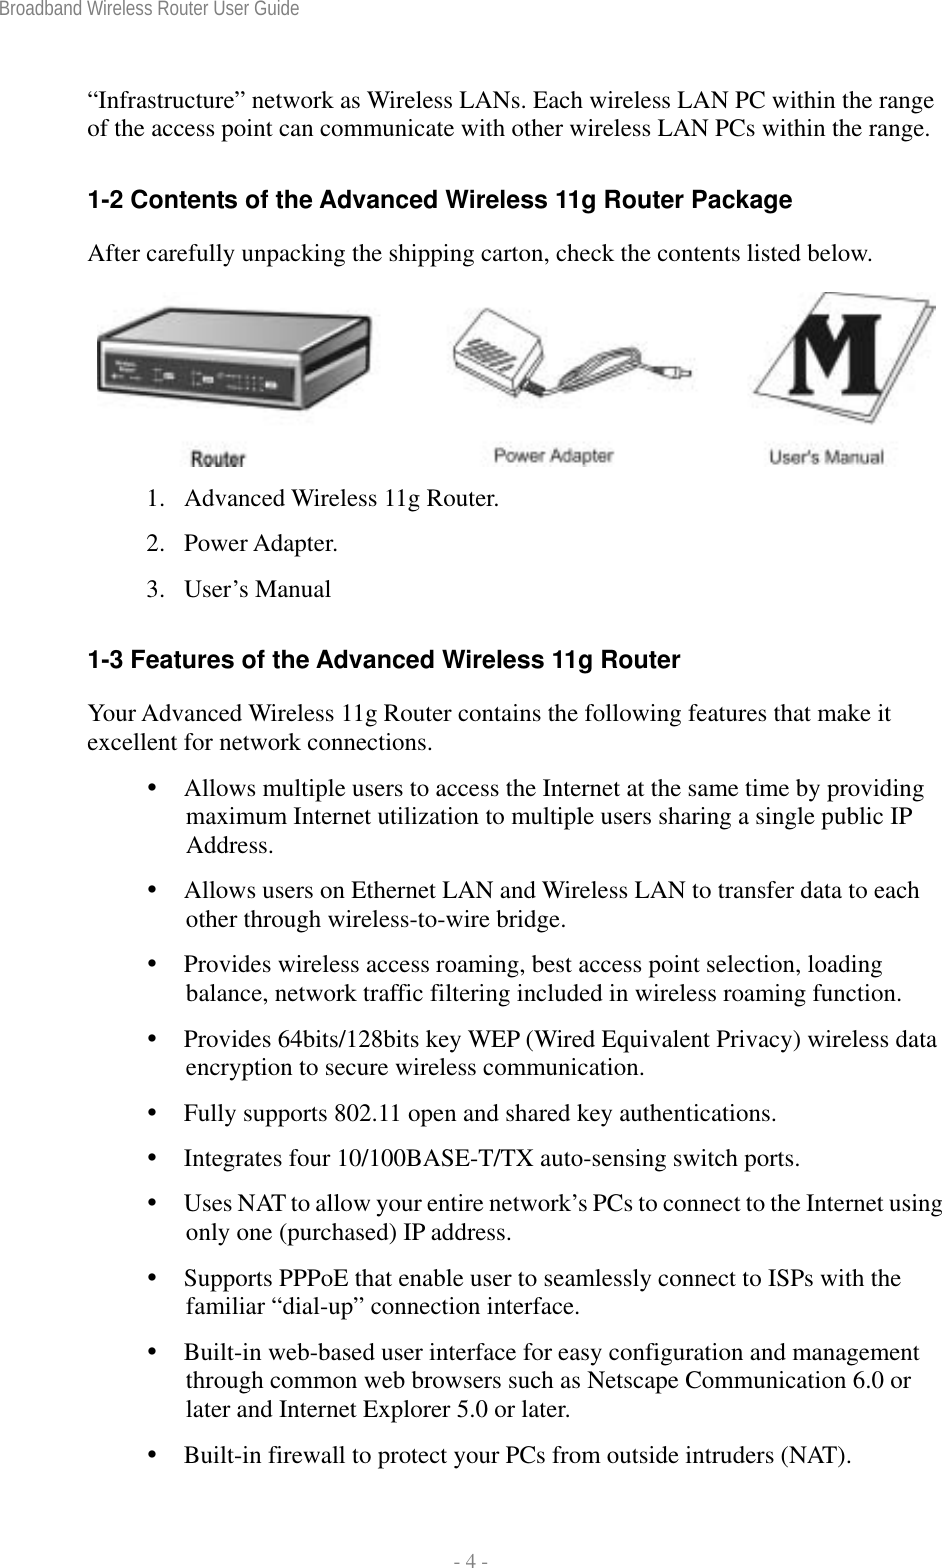 Broadband Wireless Router User Guide  - 4 - “Infrastructure” network as Wireless LANs. Each wireless LAN PC within the range of the access point can communicate with other wireless LAN PCs within the range.  1-2 Contents of the Advanced Wireless 11g Router Package After carefully unpacking the shipping carton, check the contents listed below.   1.  Advanced Wireless 11g Router. 2. Power Adapter. 3. User’s Manual  1-3 Features of the Advanced Wireless 11g Router Your Advanced Wireless 11g Router contains the following features that make it excellent for network connections.  Allows multiple users to access the Internet at the same time by providing maximum Internet utilization to multiple users sharing a single public IP Address.  Allows users on Ethernet LAN and Wireless LAN to transfer data to each other through wireless-to-wire bridge.  Provides wireless access roaming, best access point selection, loading balance, network traffic filtering included in wireless roaming function.  Provides 64bits/128bits key WEP (Wired Equivalent Privacy) wireless data encryption to secure wireless communication.  Fully supports 802.11 open and shared key authentications.  Integrates four 10/100BASE-T/TX auto-sensing switch ports.  Uses NAT to allow your entire network’s PCs to connect to the Internet using only one (purchased) IP address.  Supports PPPoE that enable user to seamlessly connect to ISPs with the familiar “dial-up” connection interface.  Built-in web-based user interface for easy configuration and management through common web browsers such as Netscape Communication 6.0 or later and Internet Explorer 5.0 or later.  Built-in firewall to protect your PCs from outside intruders (NAT). 